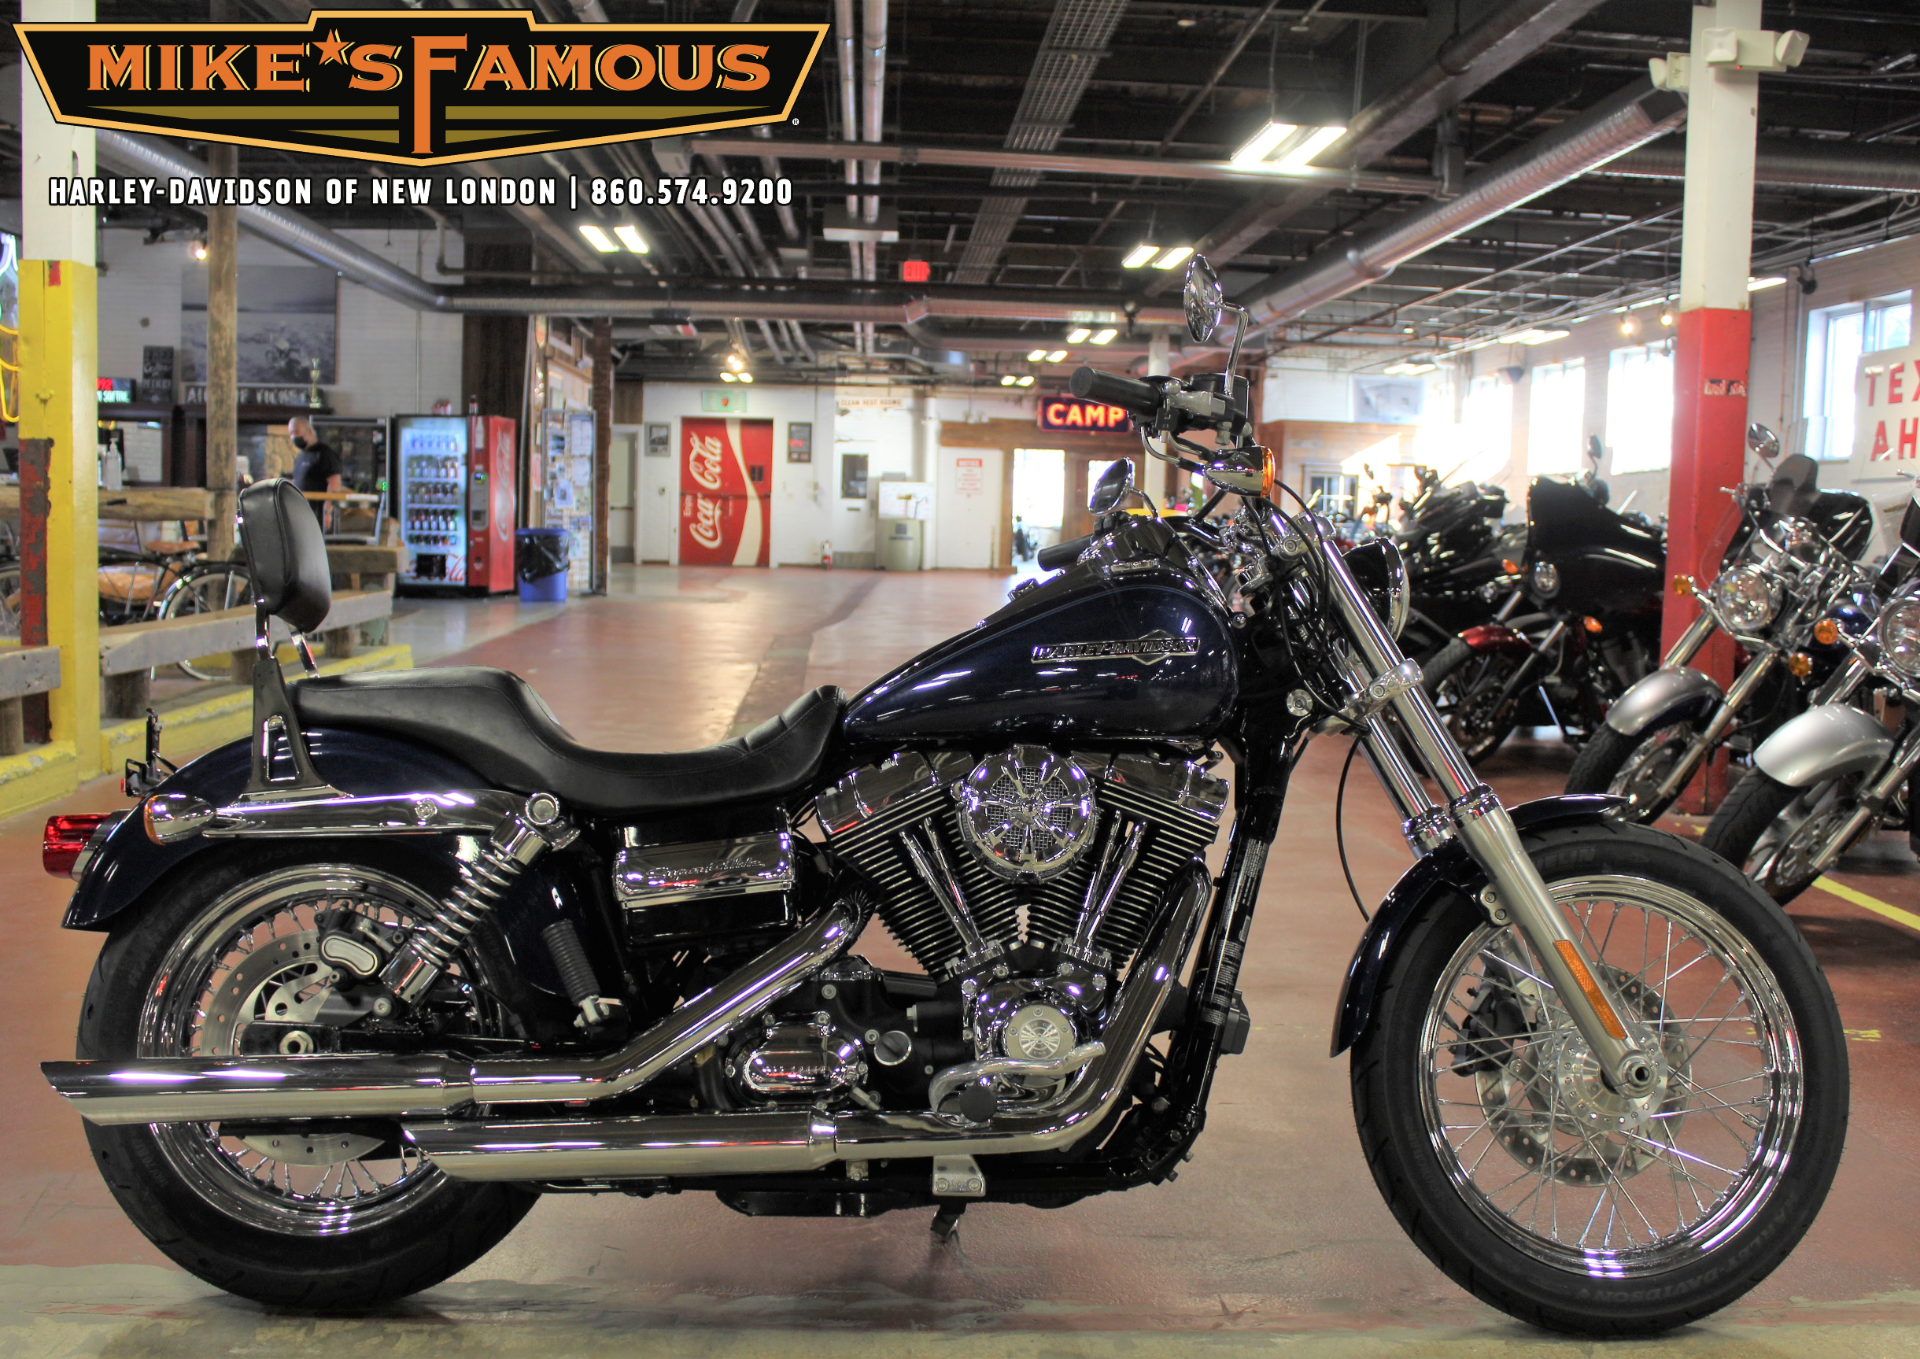 Used 2012 Harley Davidson Dyna Super Glide Custom Big Blue Pearl Motorcycles In New London Ct T30516a